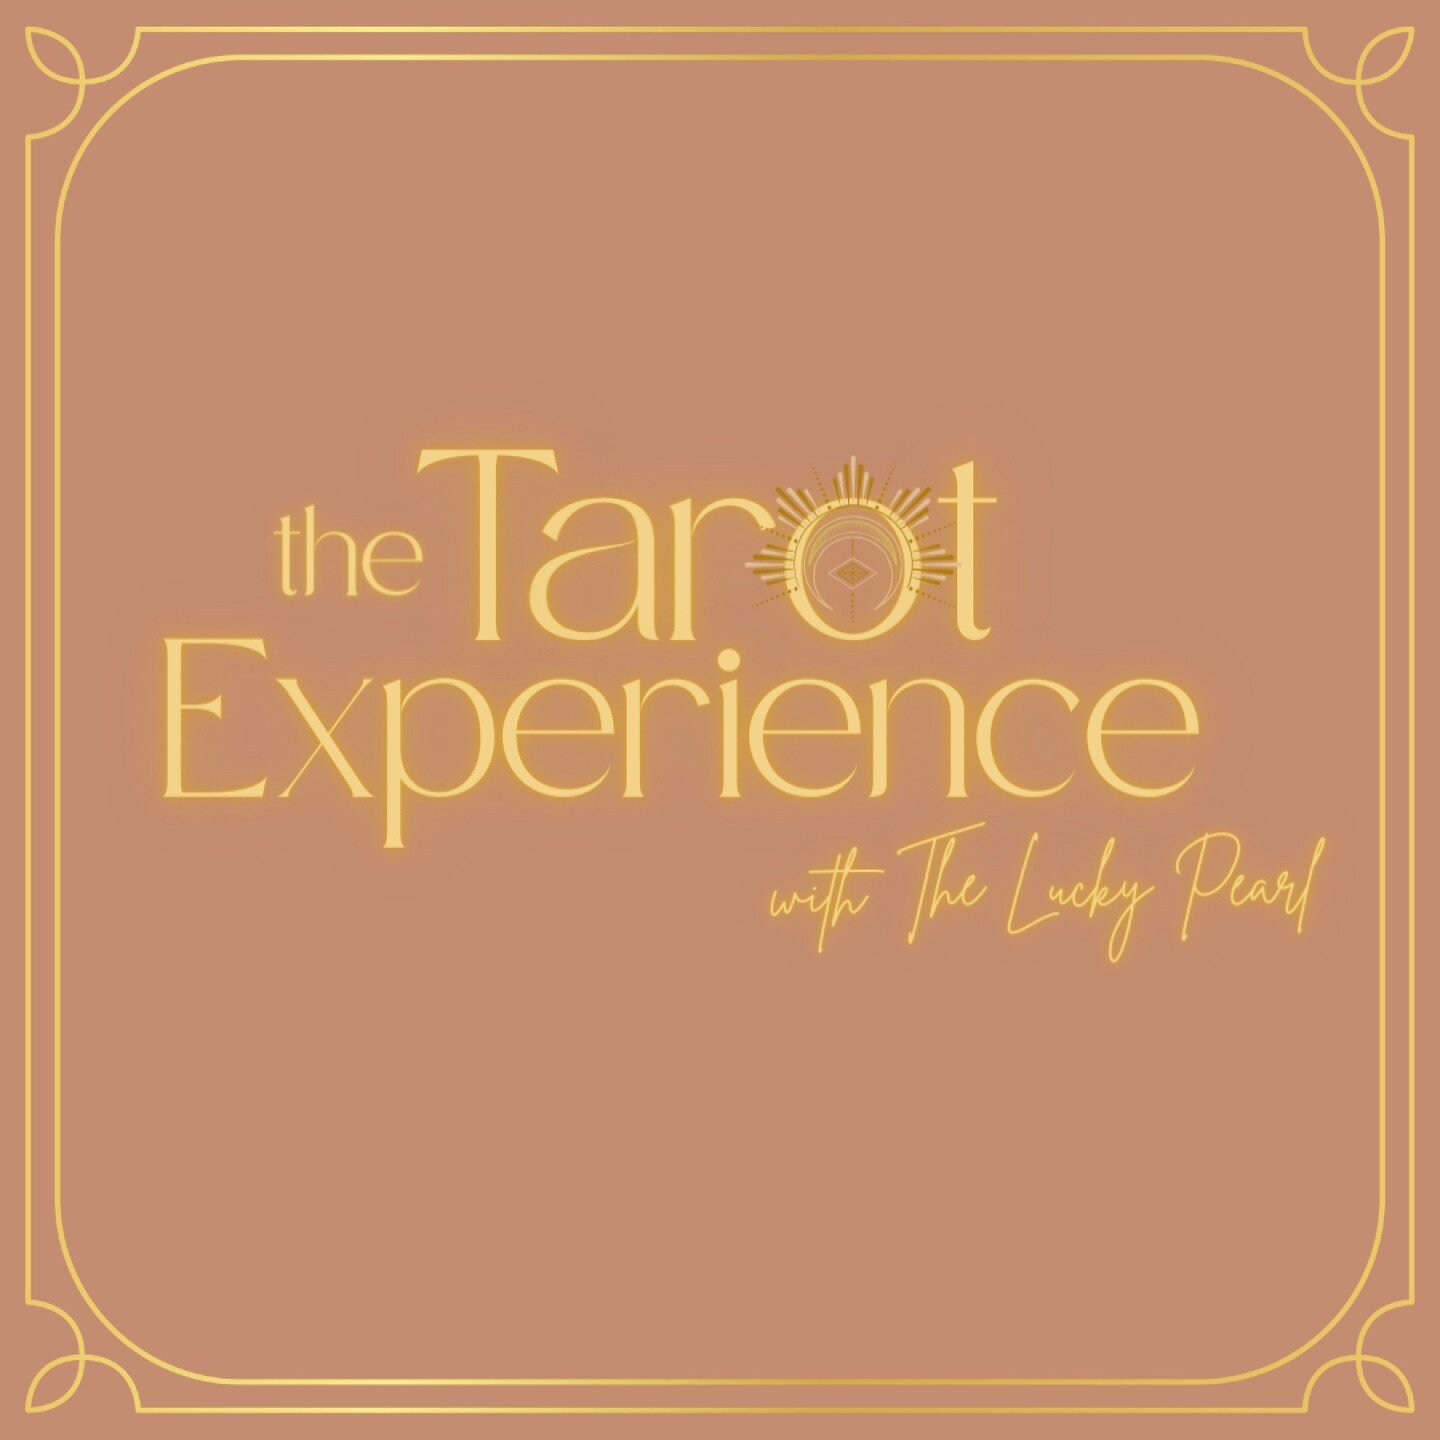 The Tarot Experience with The Lucky Pearl

What you&rsquo;ll receive&hellip;.
🌟3 Course meal
🌟Cocktail or Non-alcoholic beverage, Wine with Dinner
🌟Crystal specifically chosen for you 
🌟3 card tarot pull accompanied by descriptors
🌟A collective 